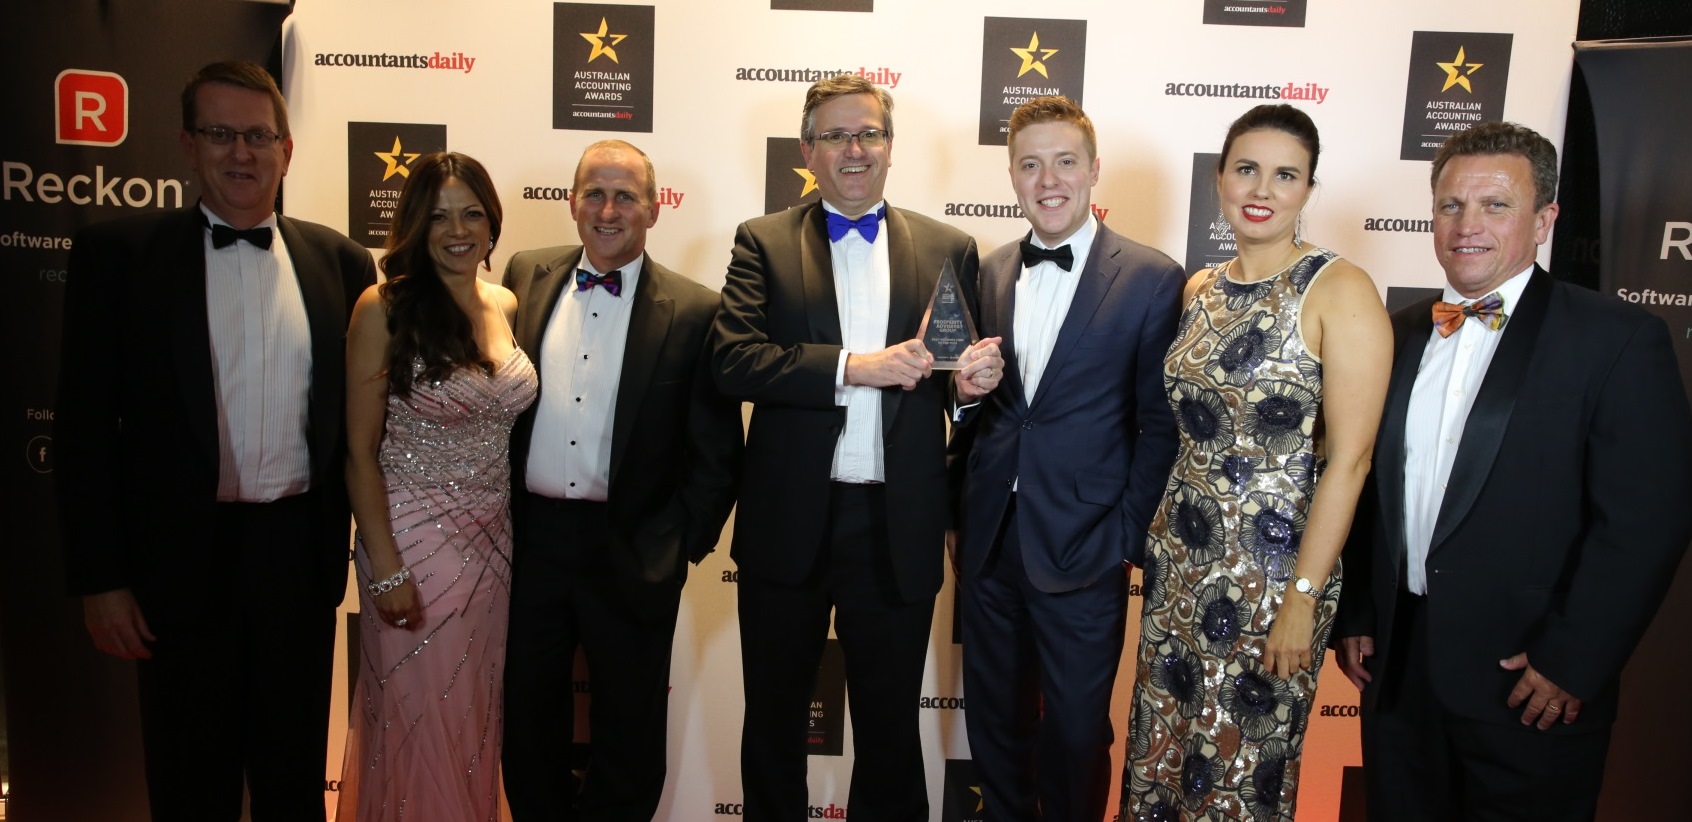 Prosperity feature in Australian Accounting Awards